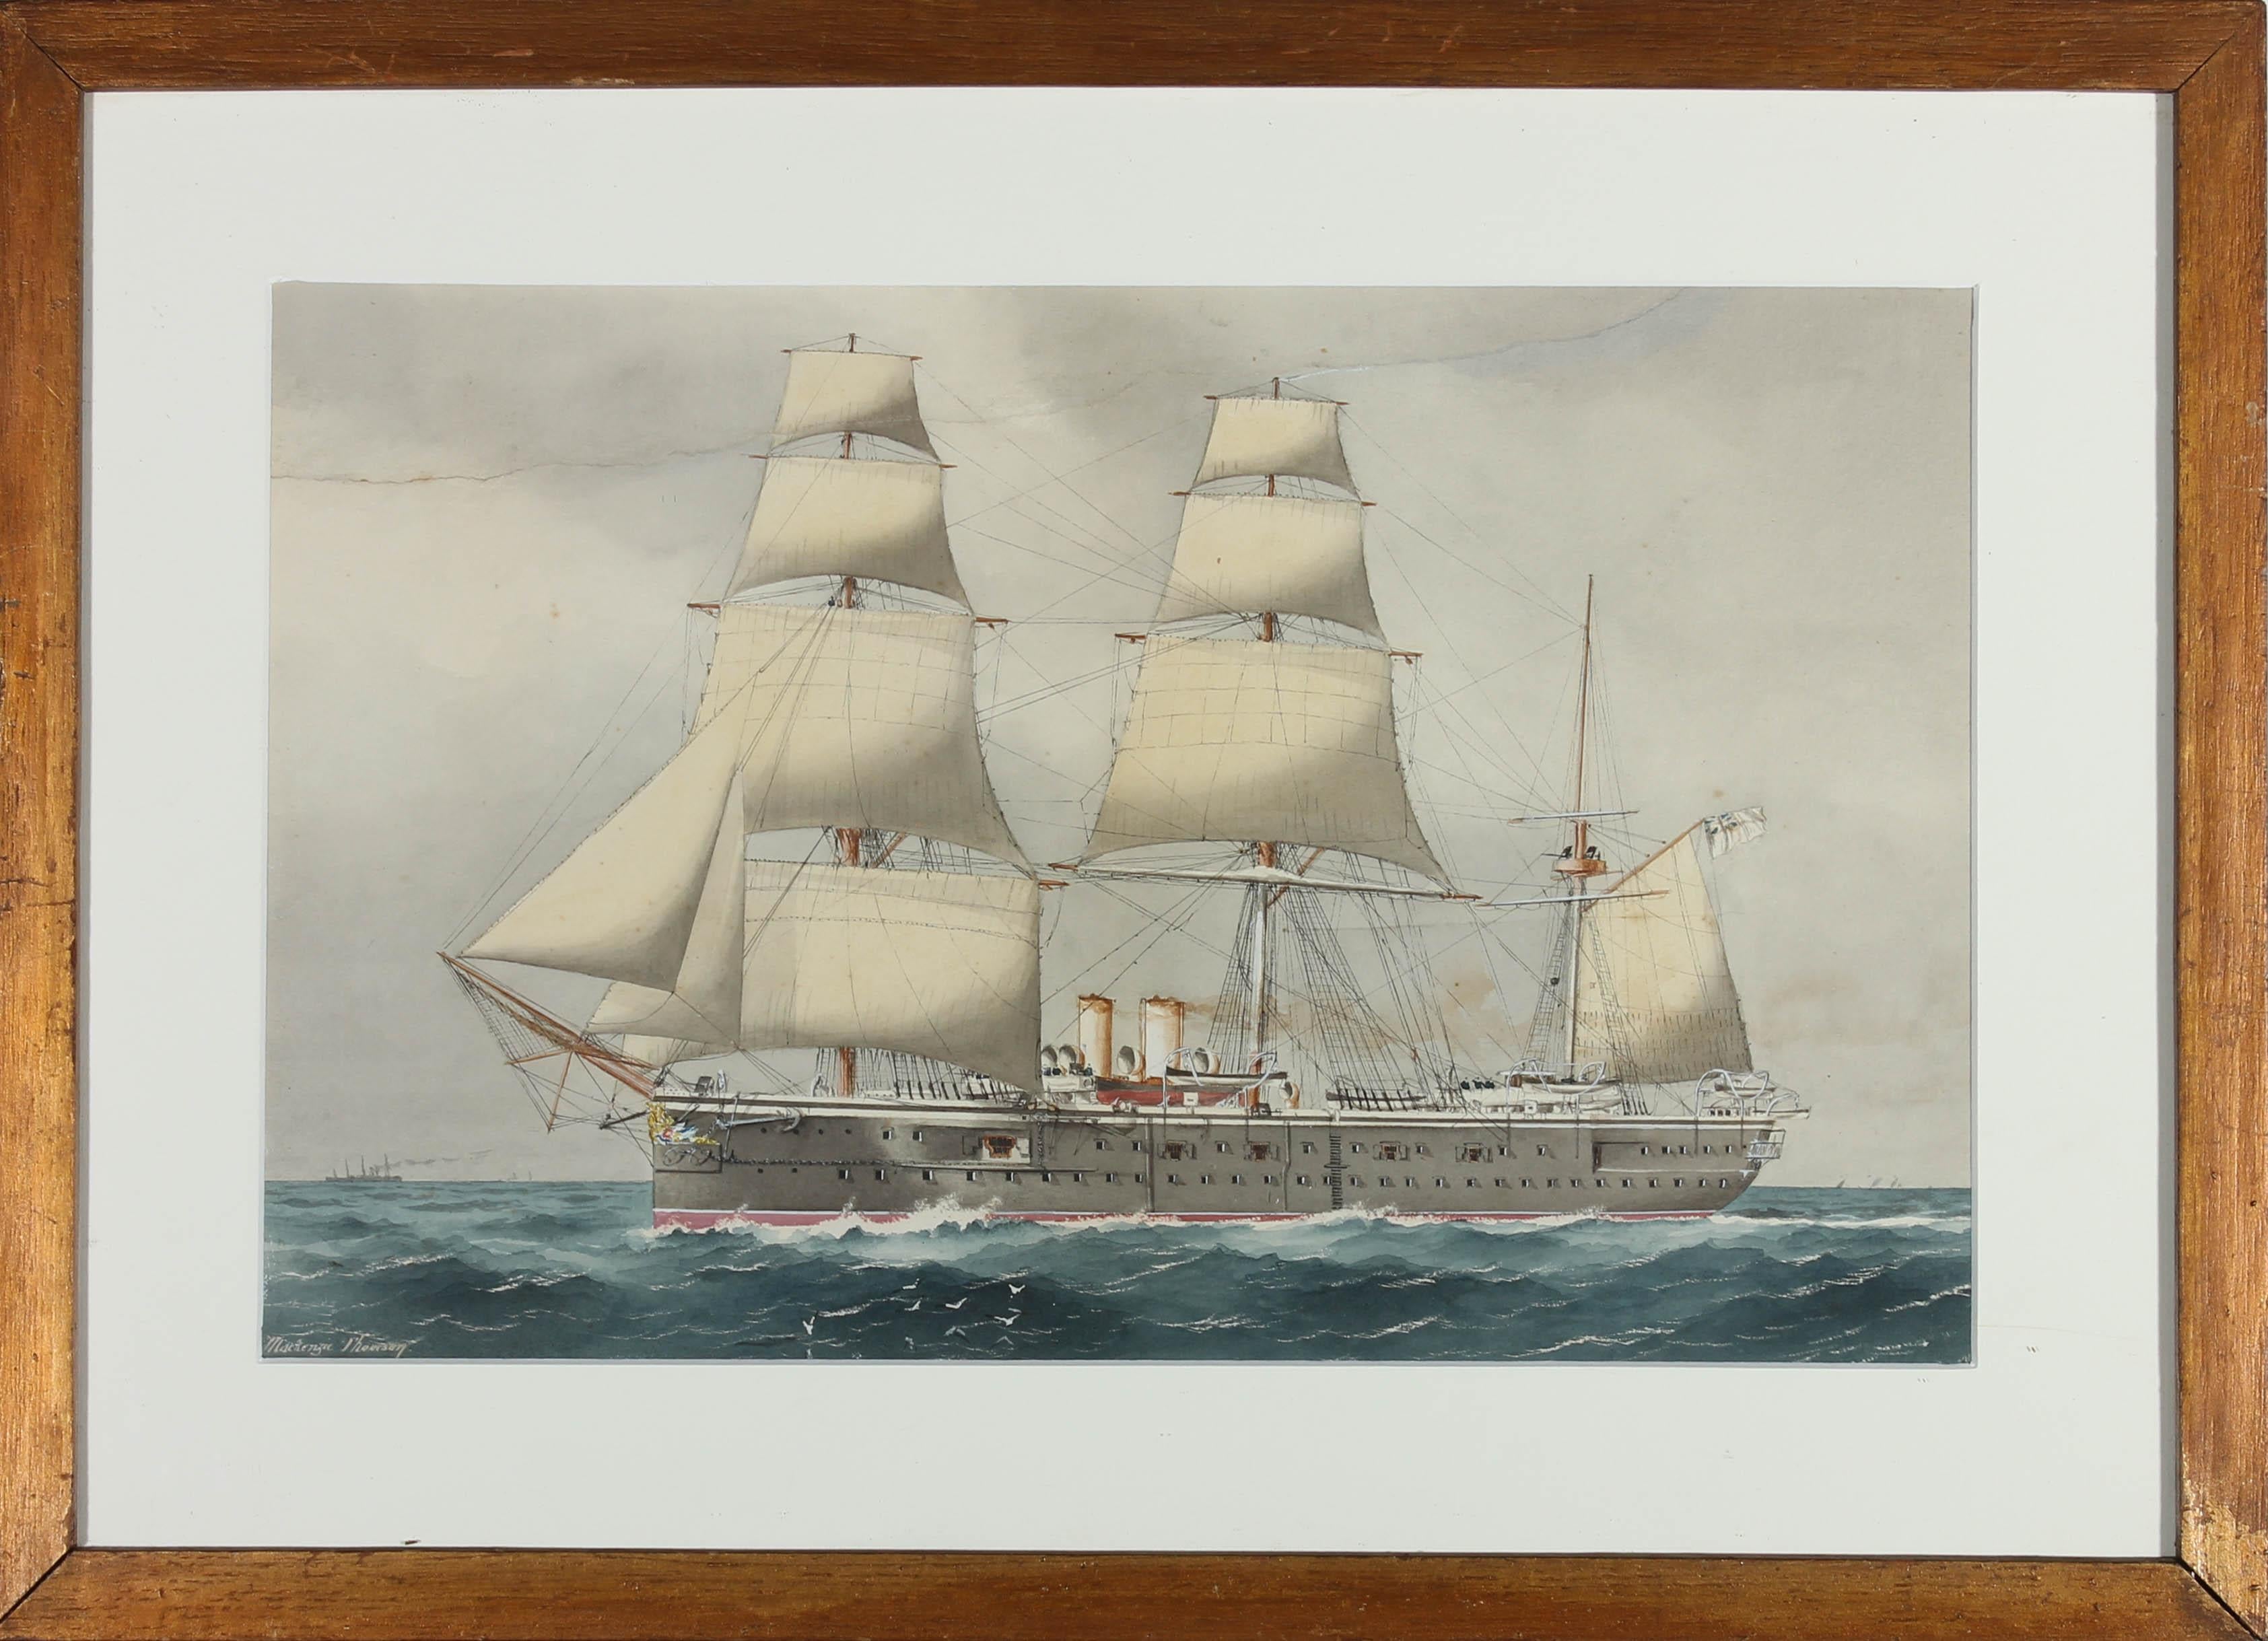 This accomplished nautical study depicts the HMS Northampton which was a Nelson-class armoured cruiser built for the Royal Navy in 1876. She was built by Napier and Sons in their yard in Scotland and was the flagship of the North America West Indies